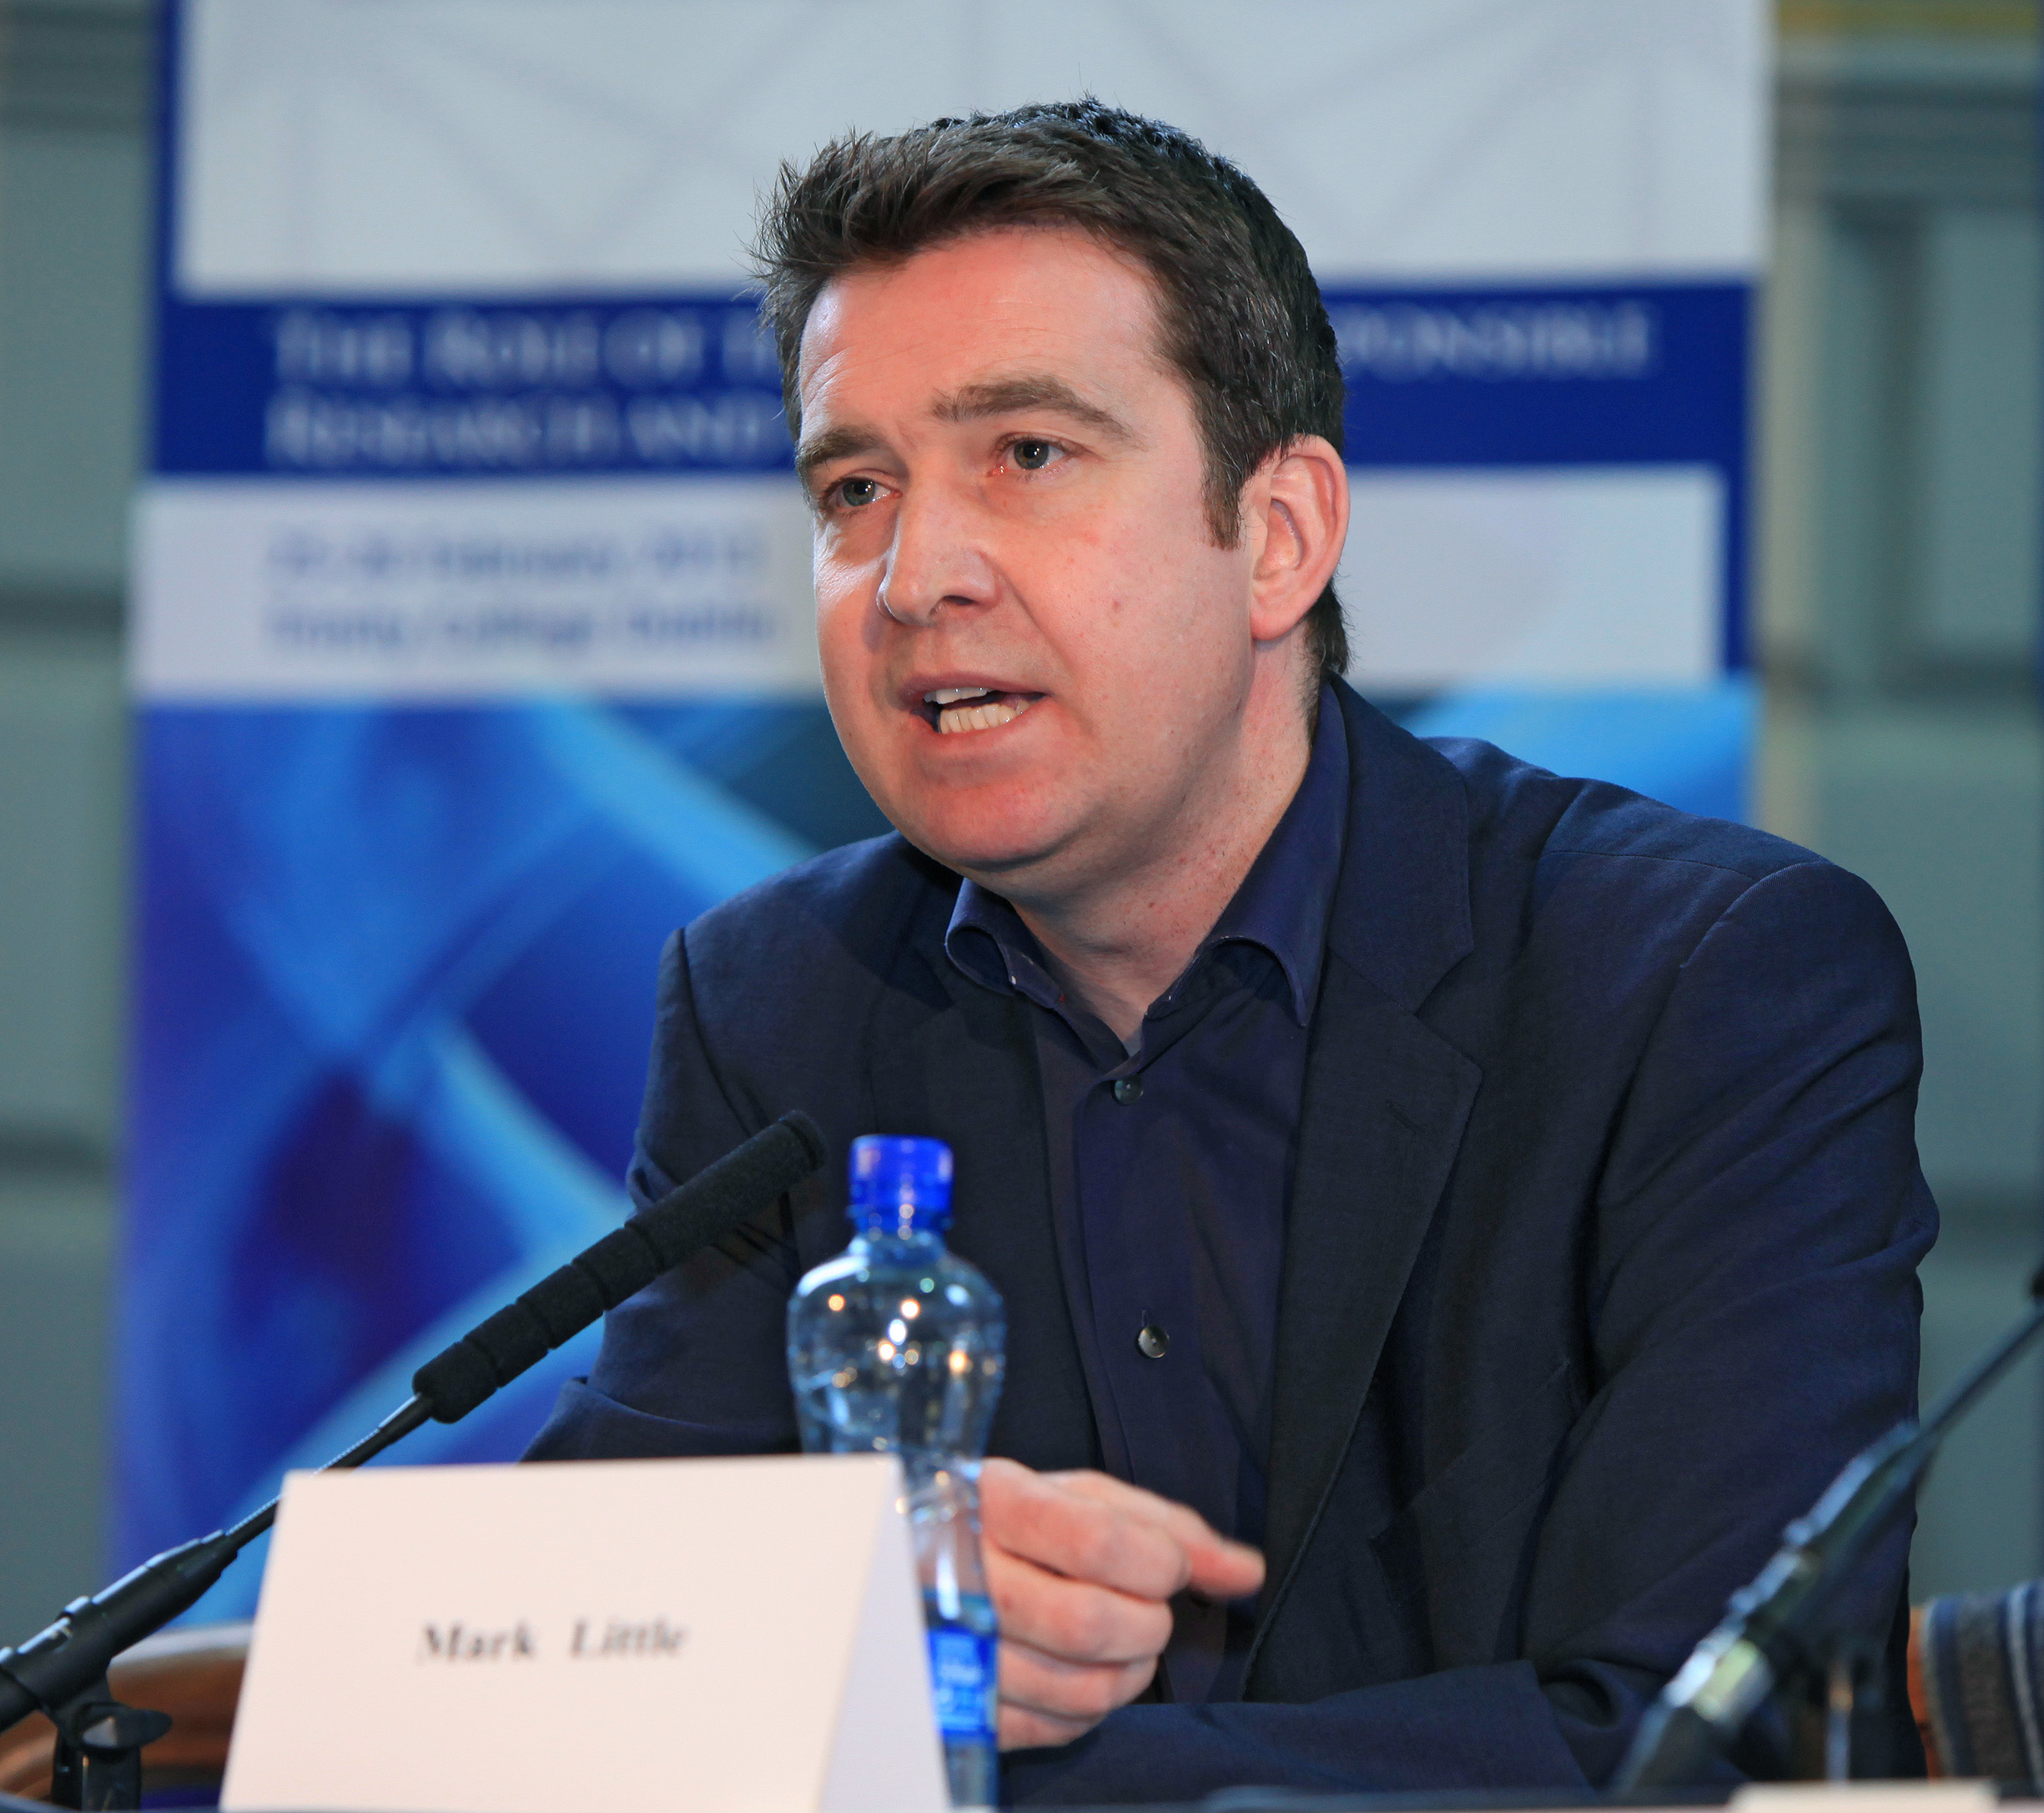 Mr. Mark Little, Founder and CEO of Storyful